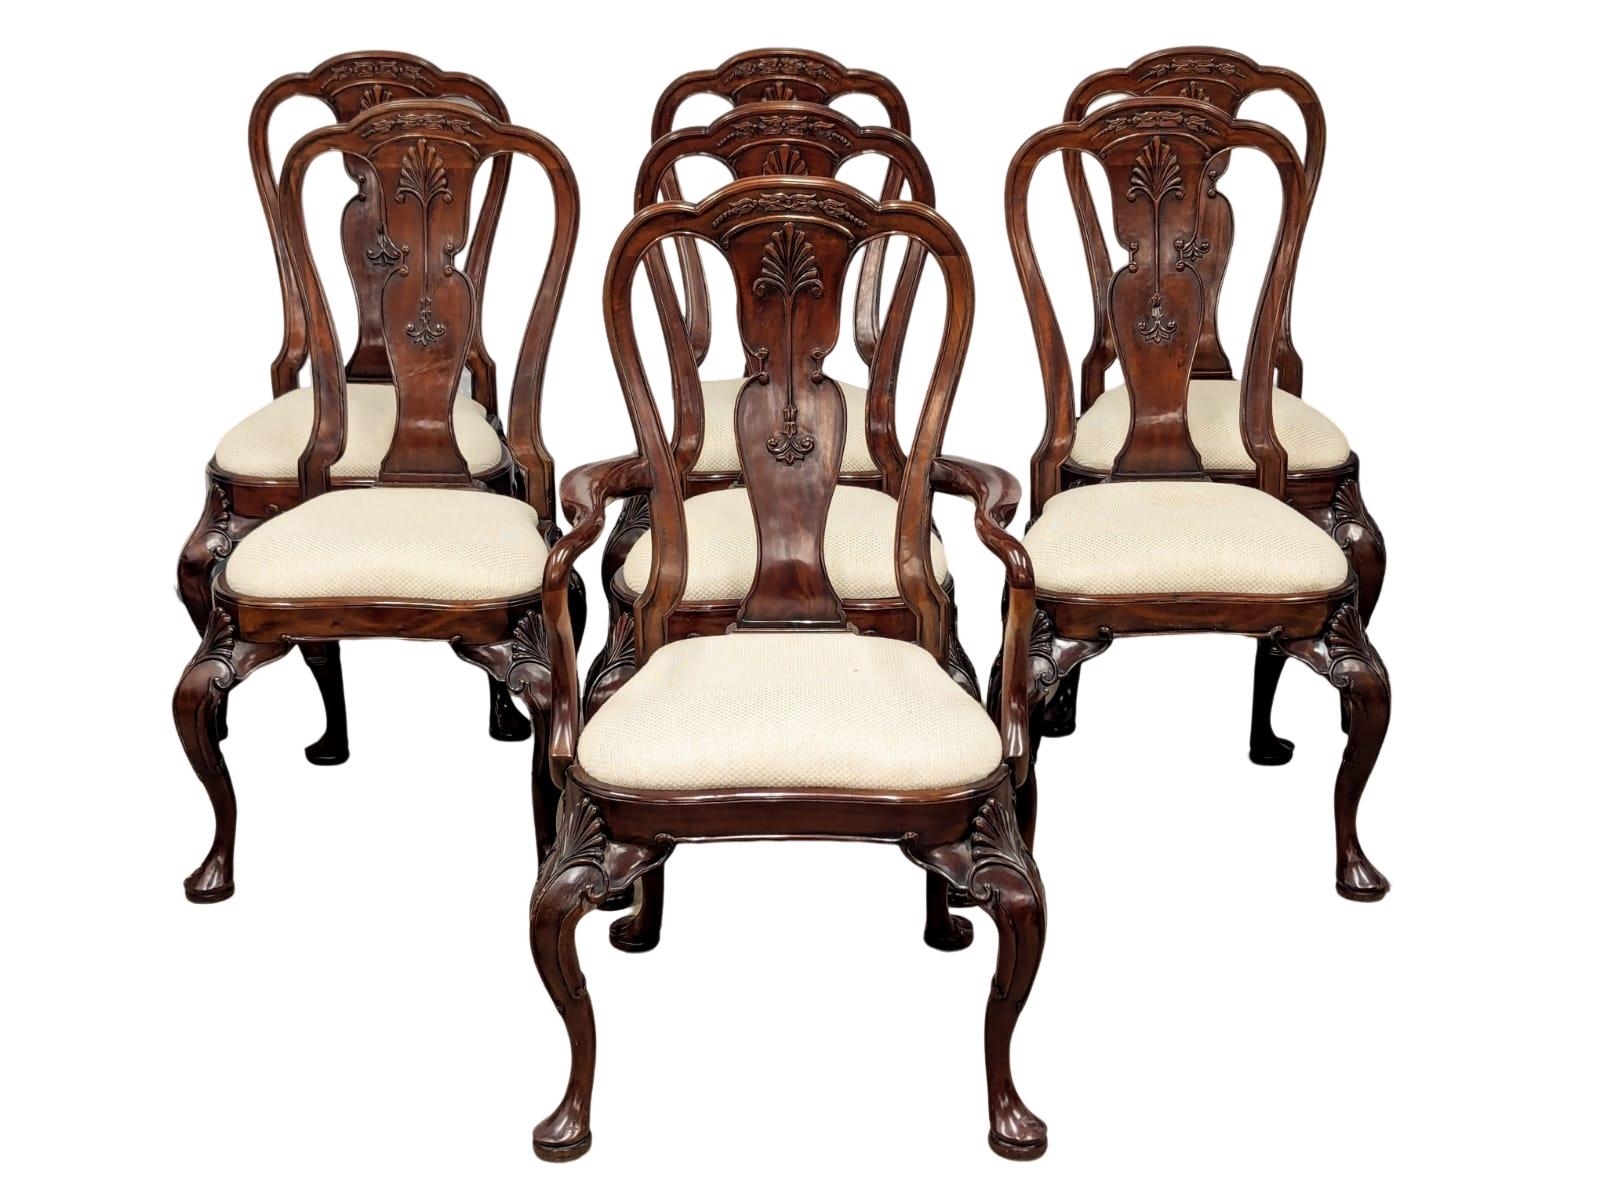 A set of 7 mahogany George I style dining chairs.